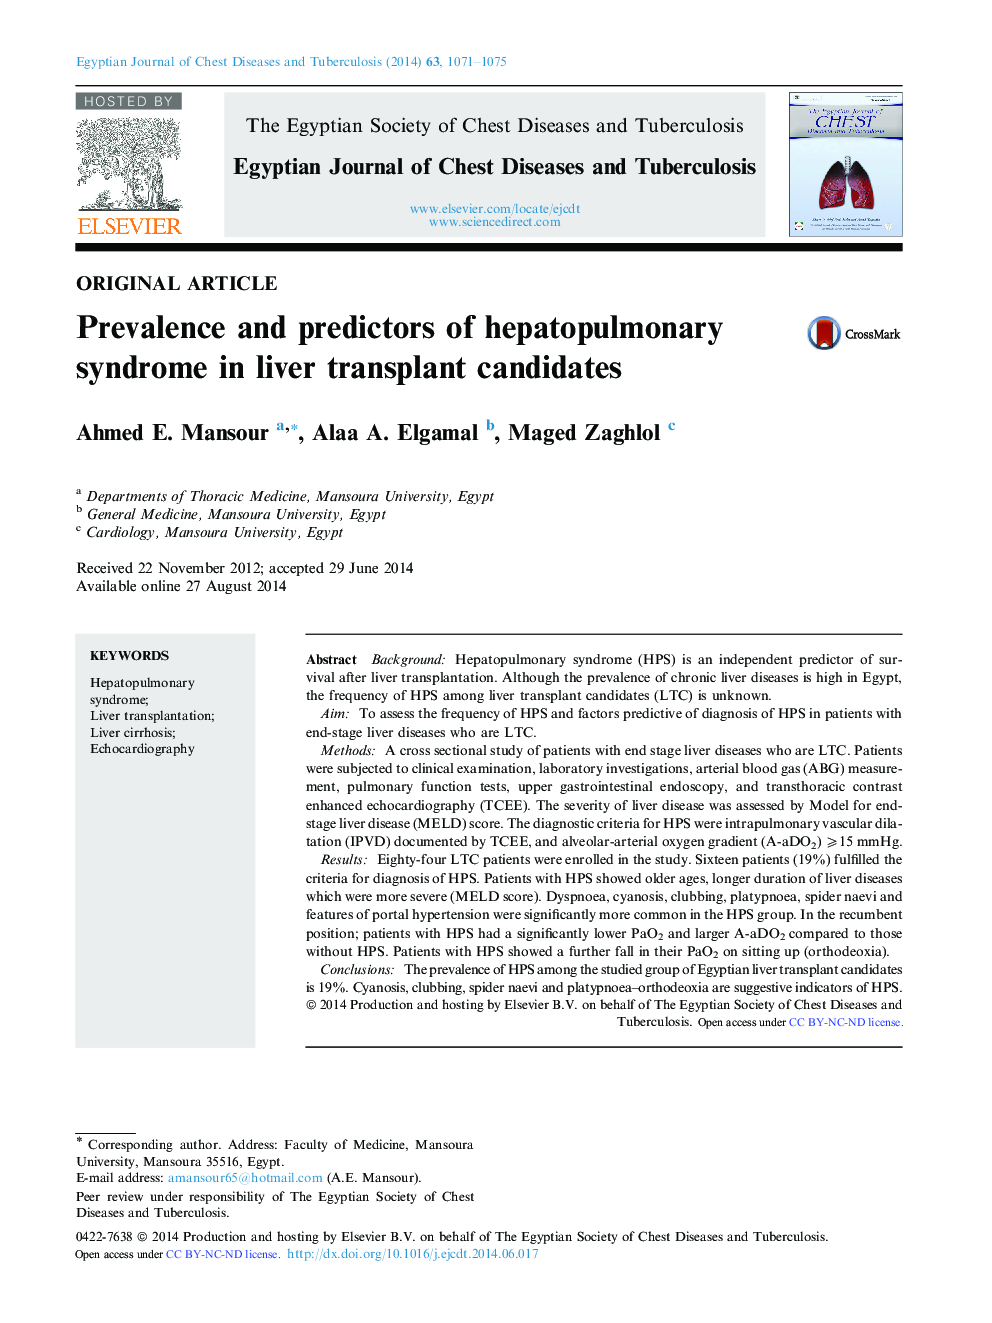 Prevalence and predictors of hepatopulmonary syndrome in liver transplant candidates 